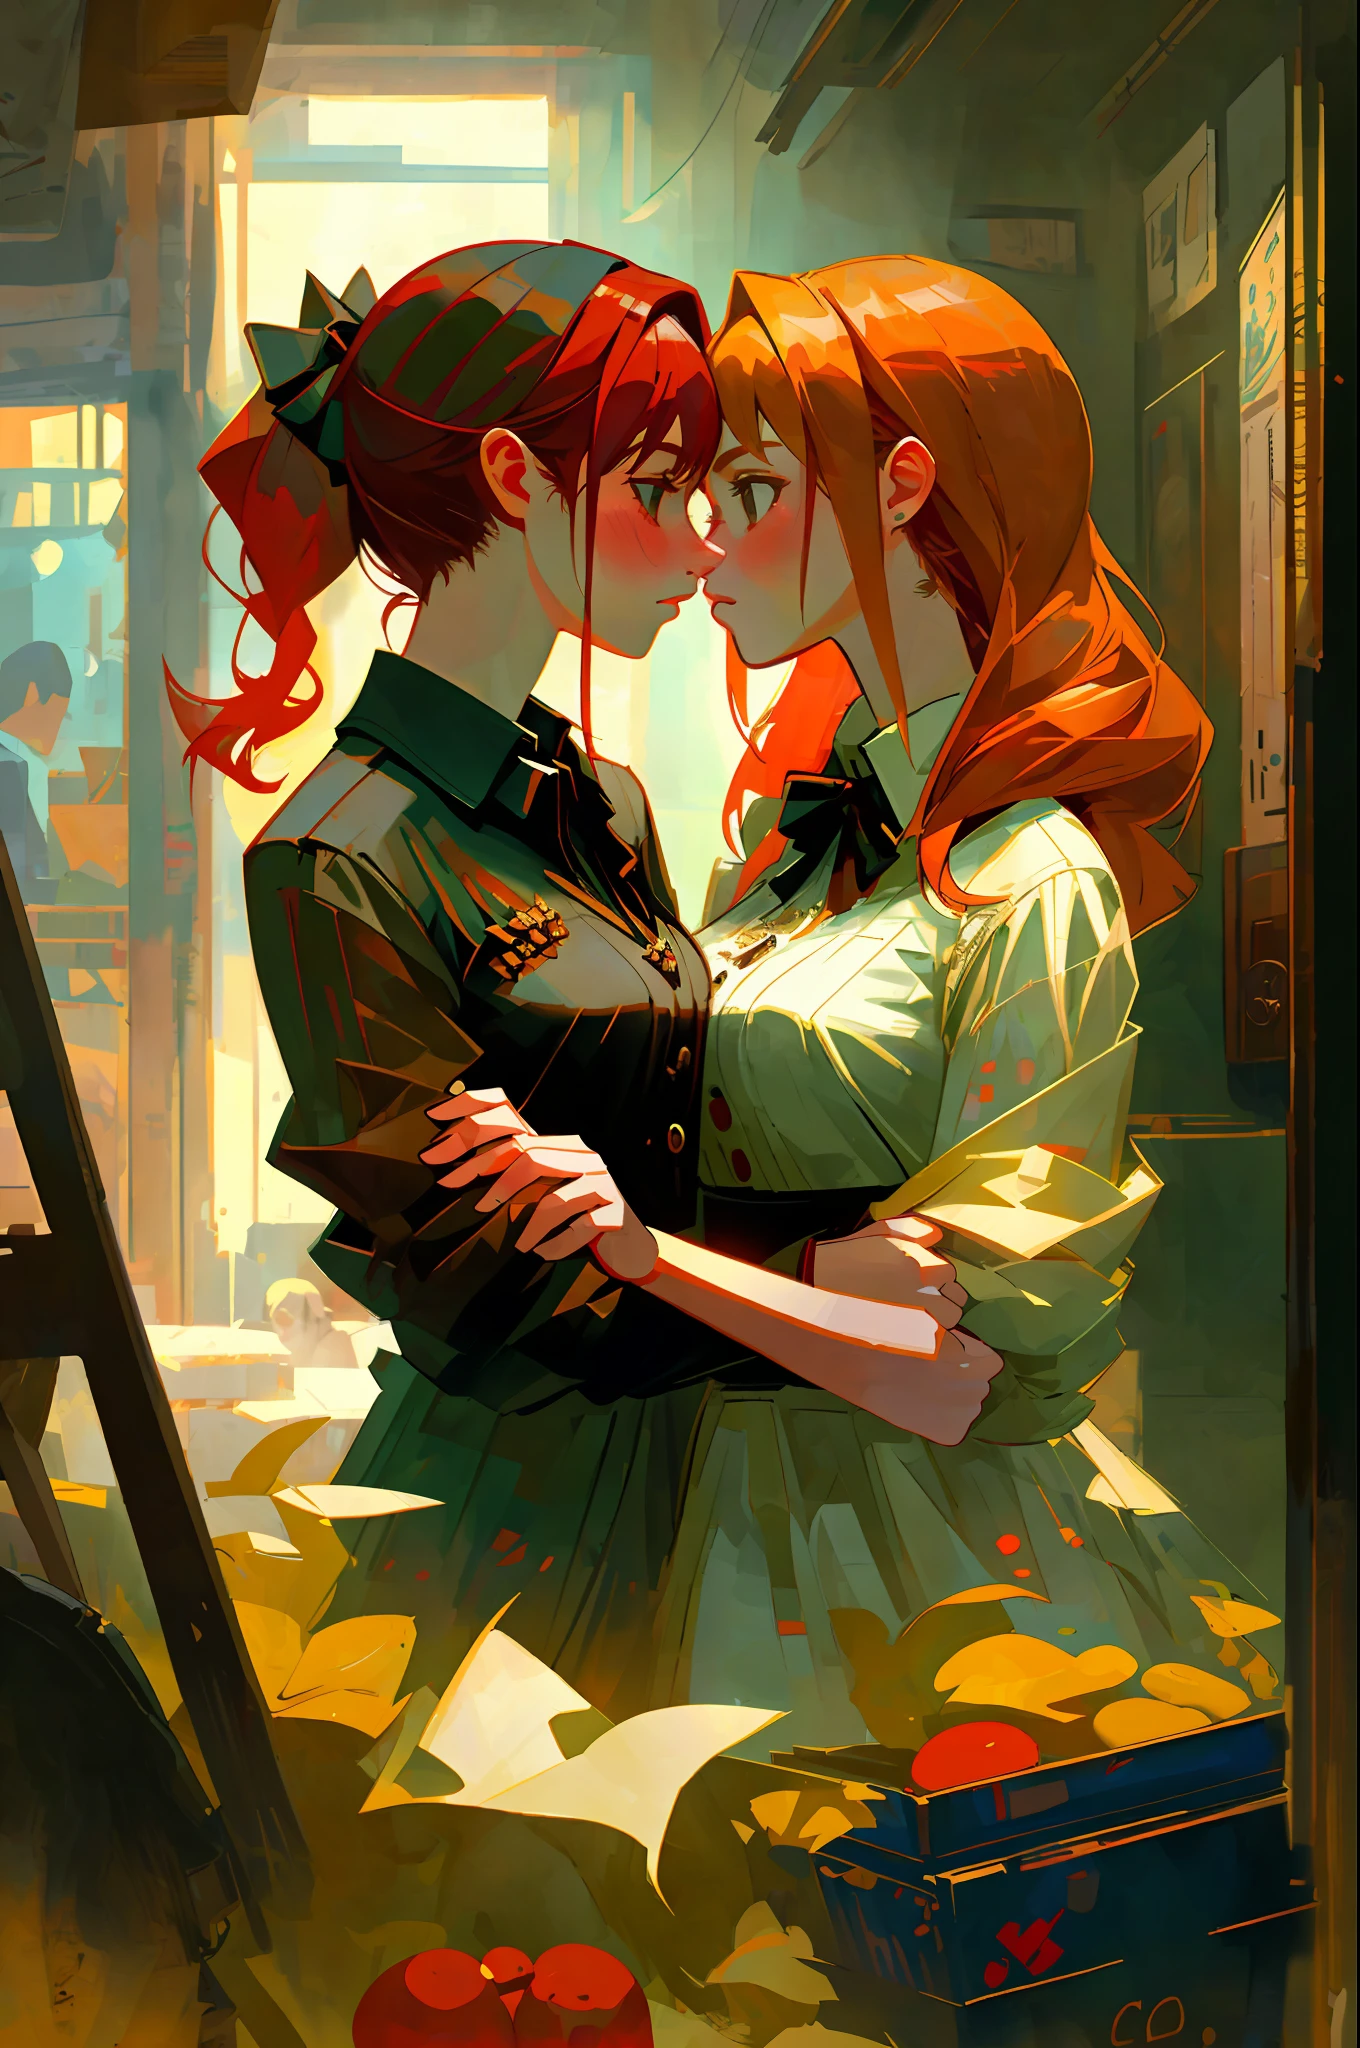 fantastic realism, bokeh,  ultra detailed, 2girls facing each other, chest against chest, kiss, red head and blond girl, underwear, indoors, narrow storage room, detailed background,